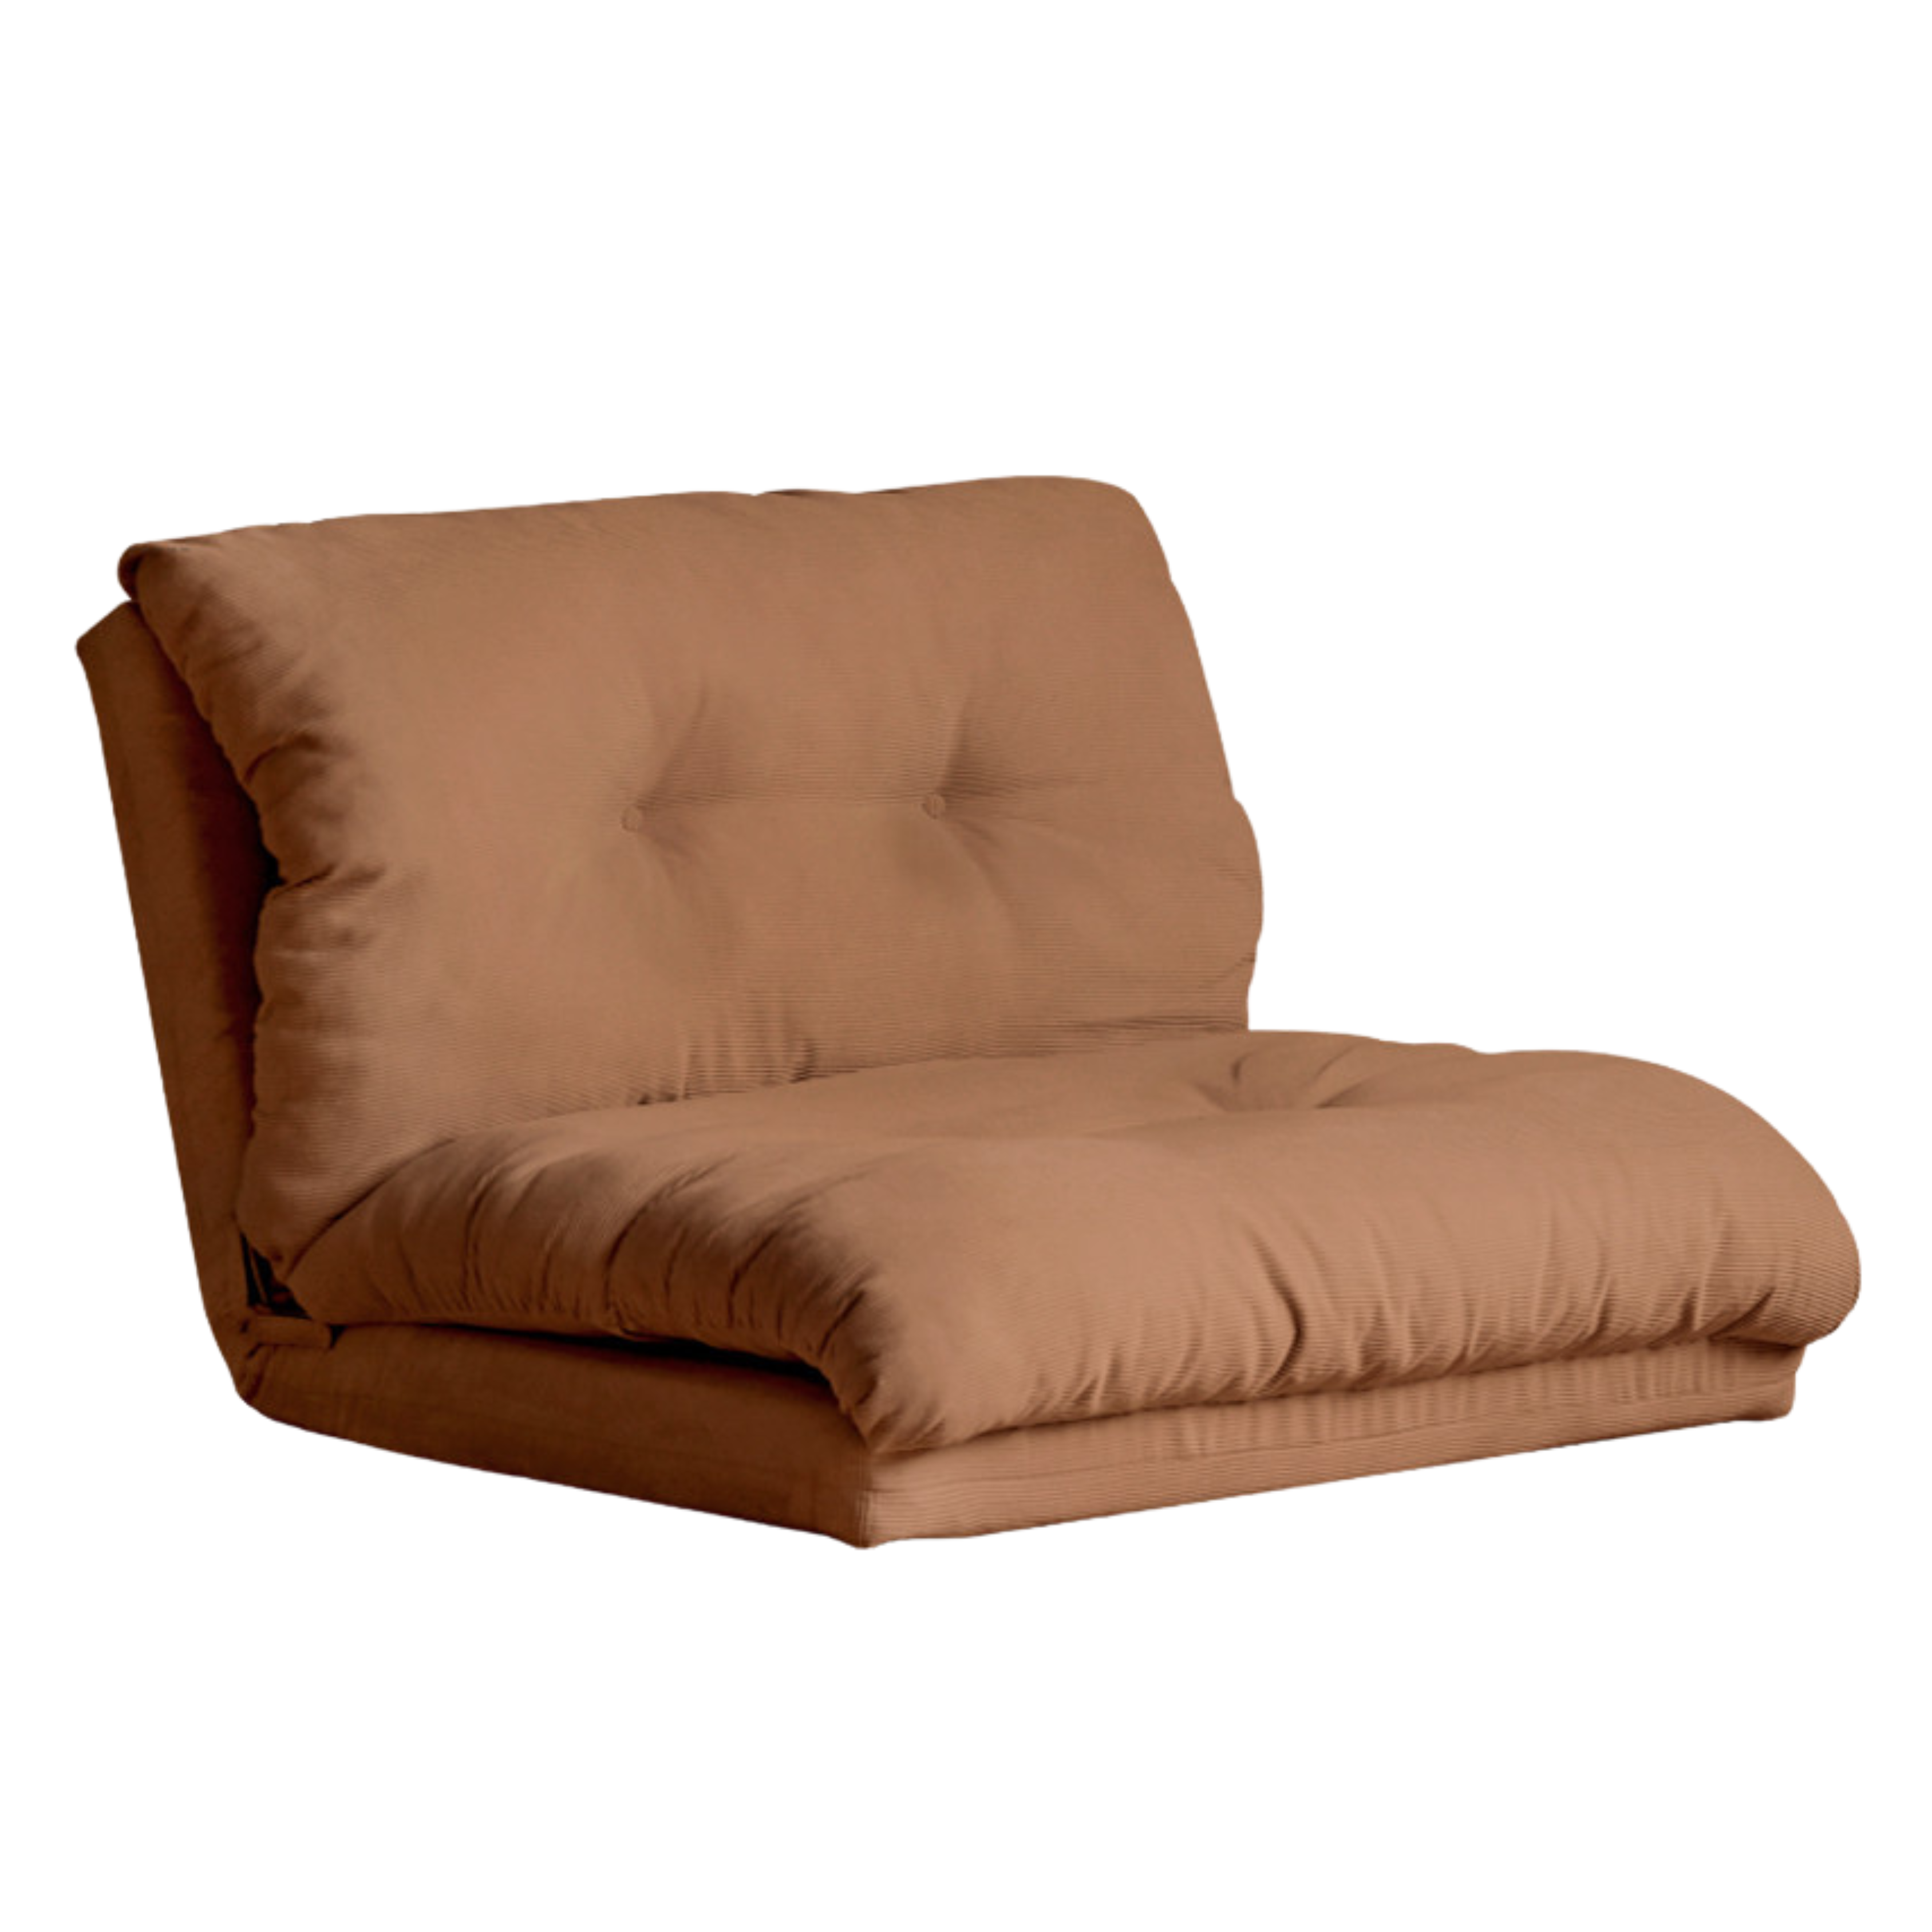 Sofa bed, cream style leisure,technology cloth